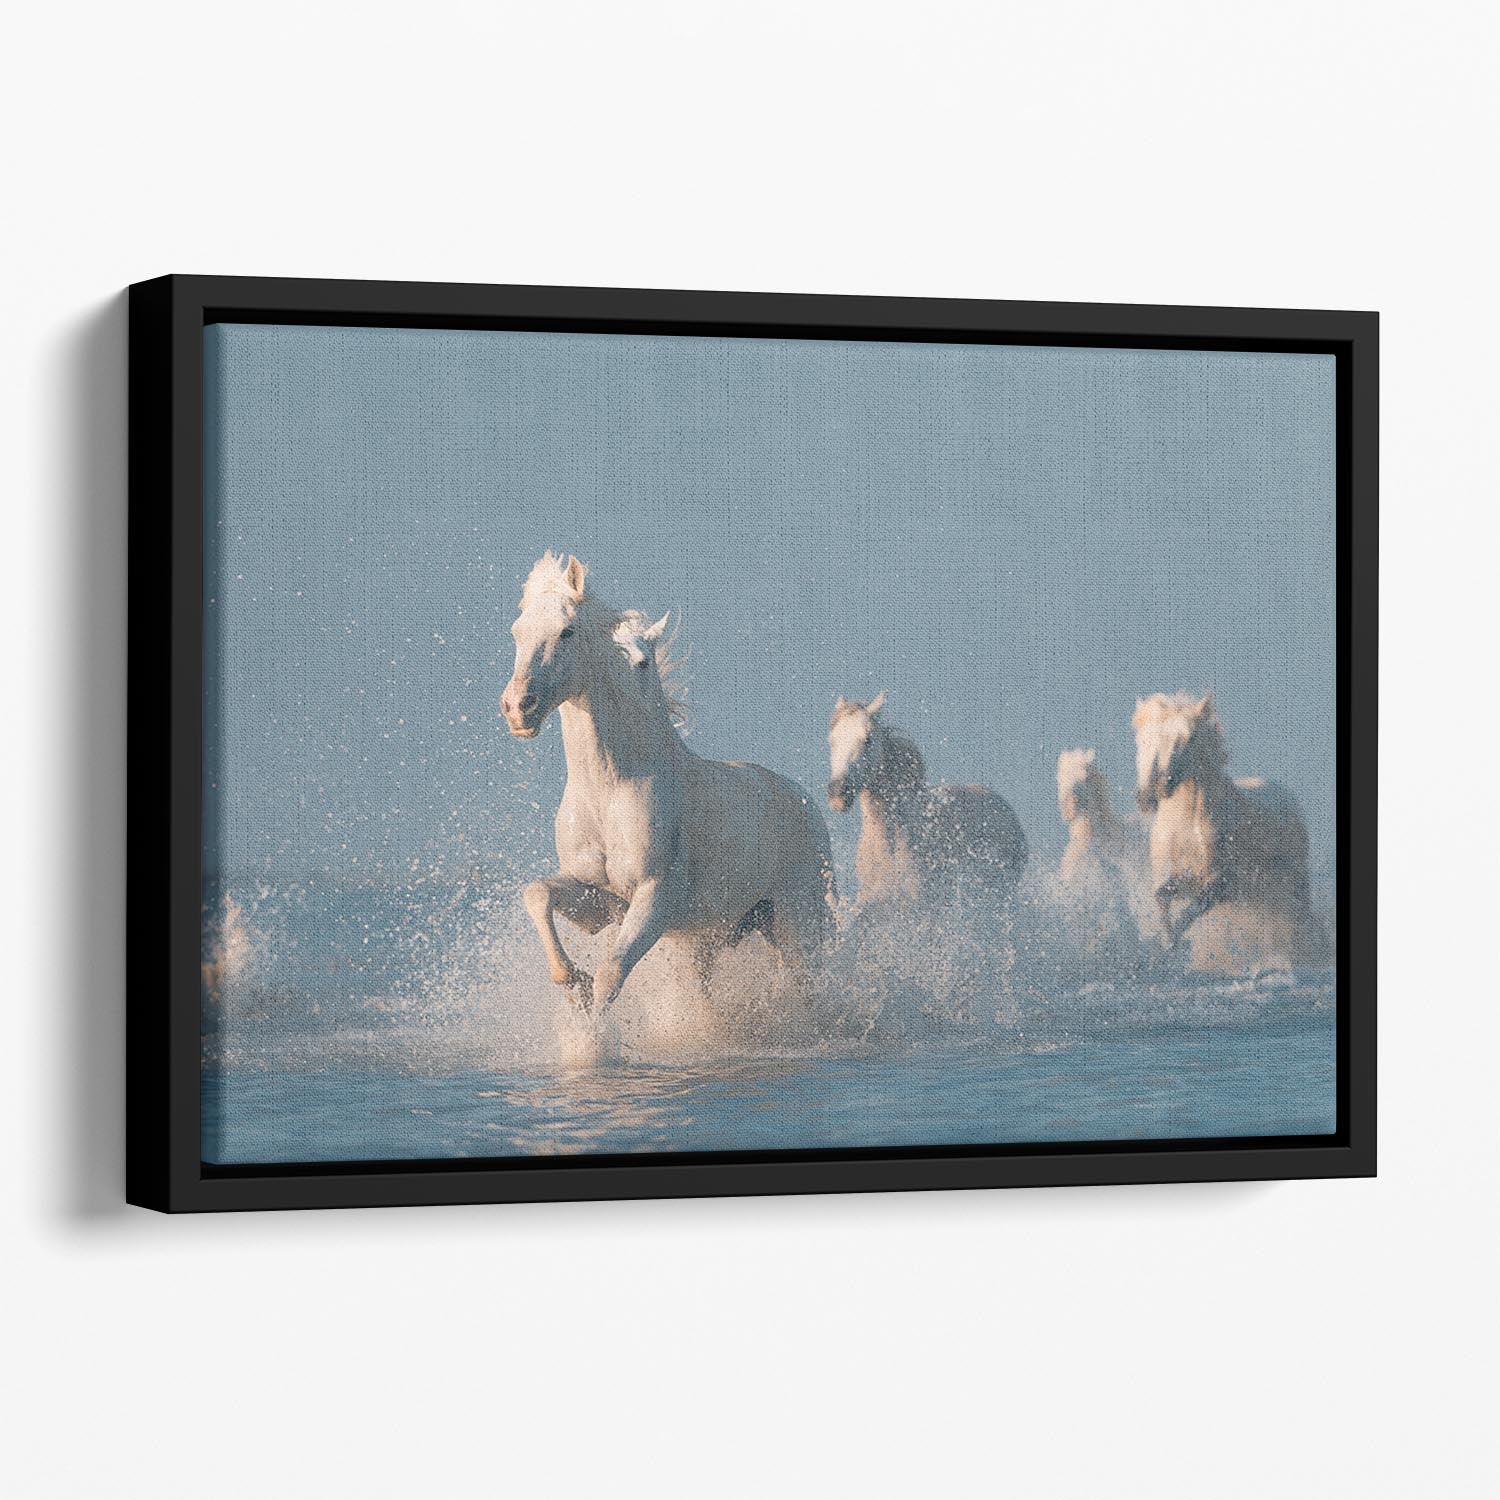 Wite Horses Running In Water Floating Framed Canvas - Canvas Art Rocks - 1